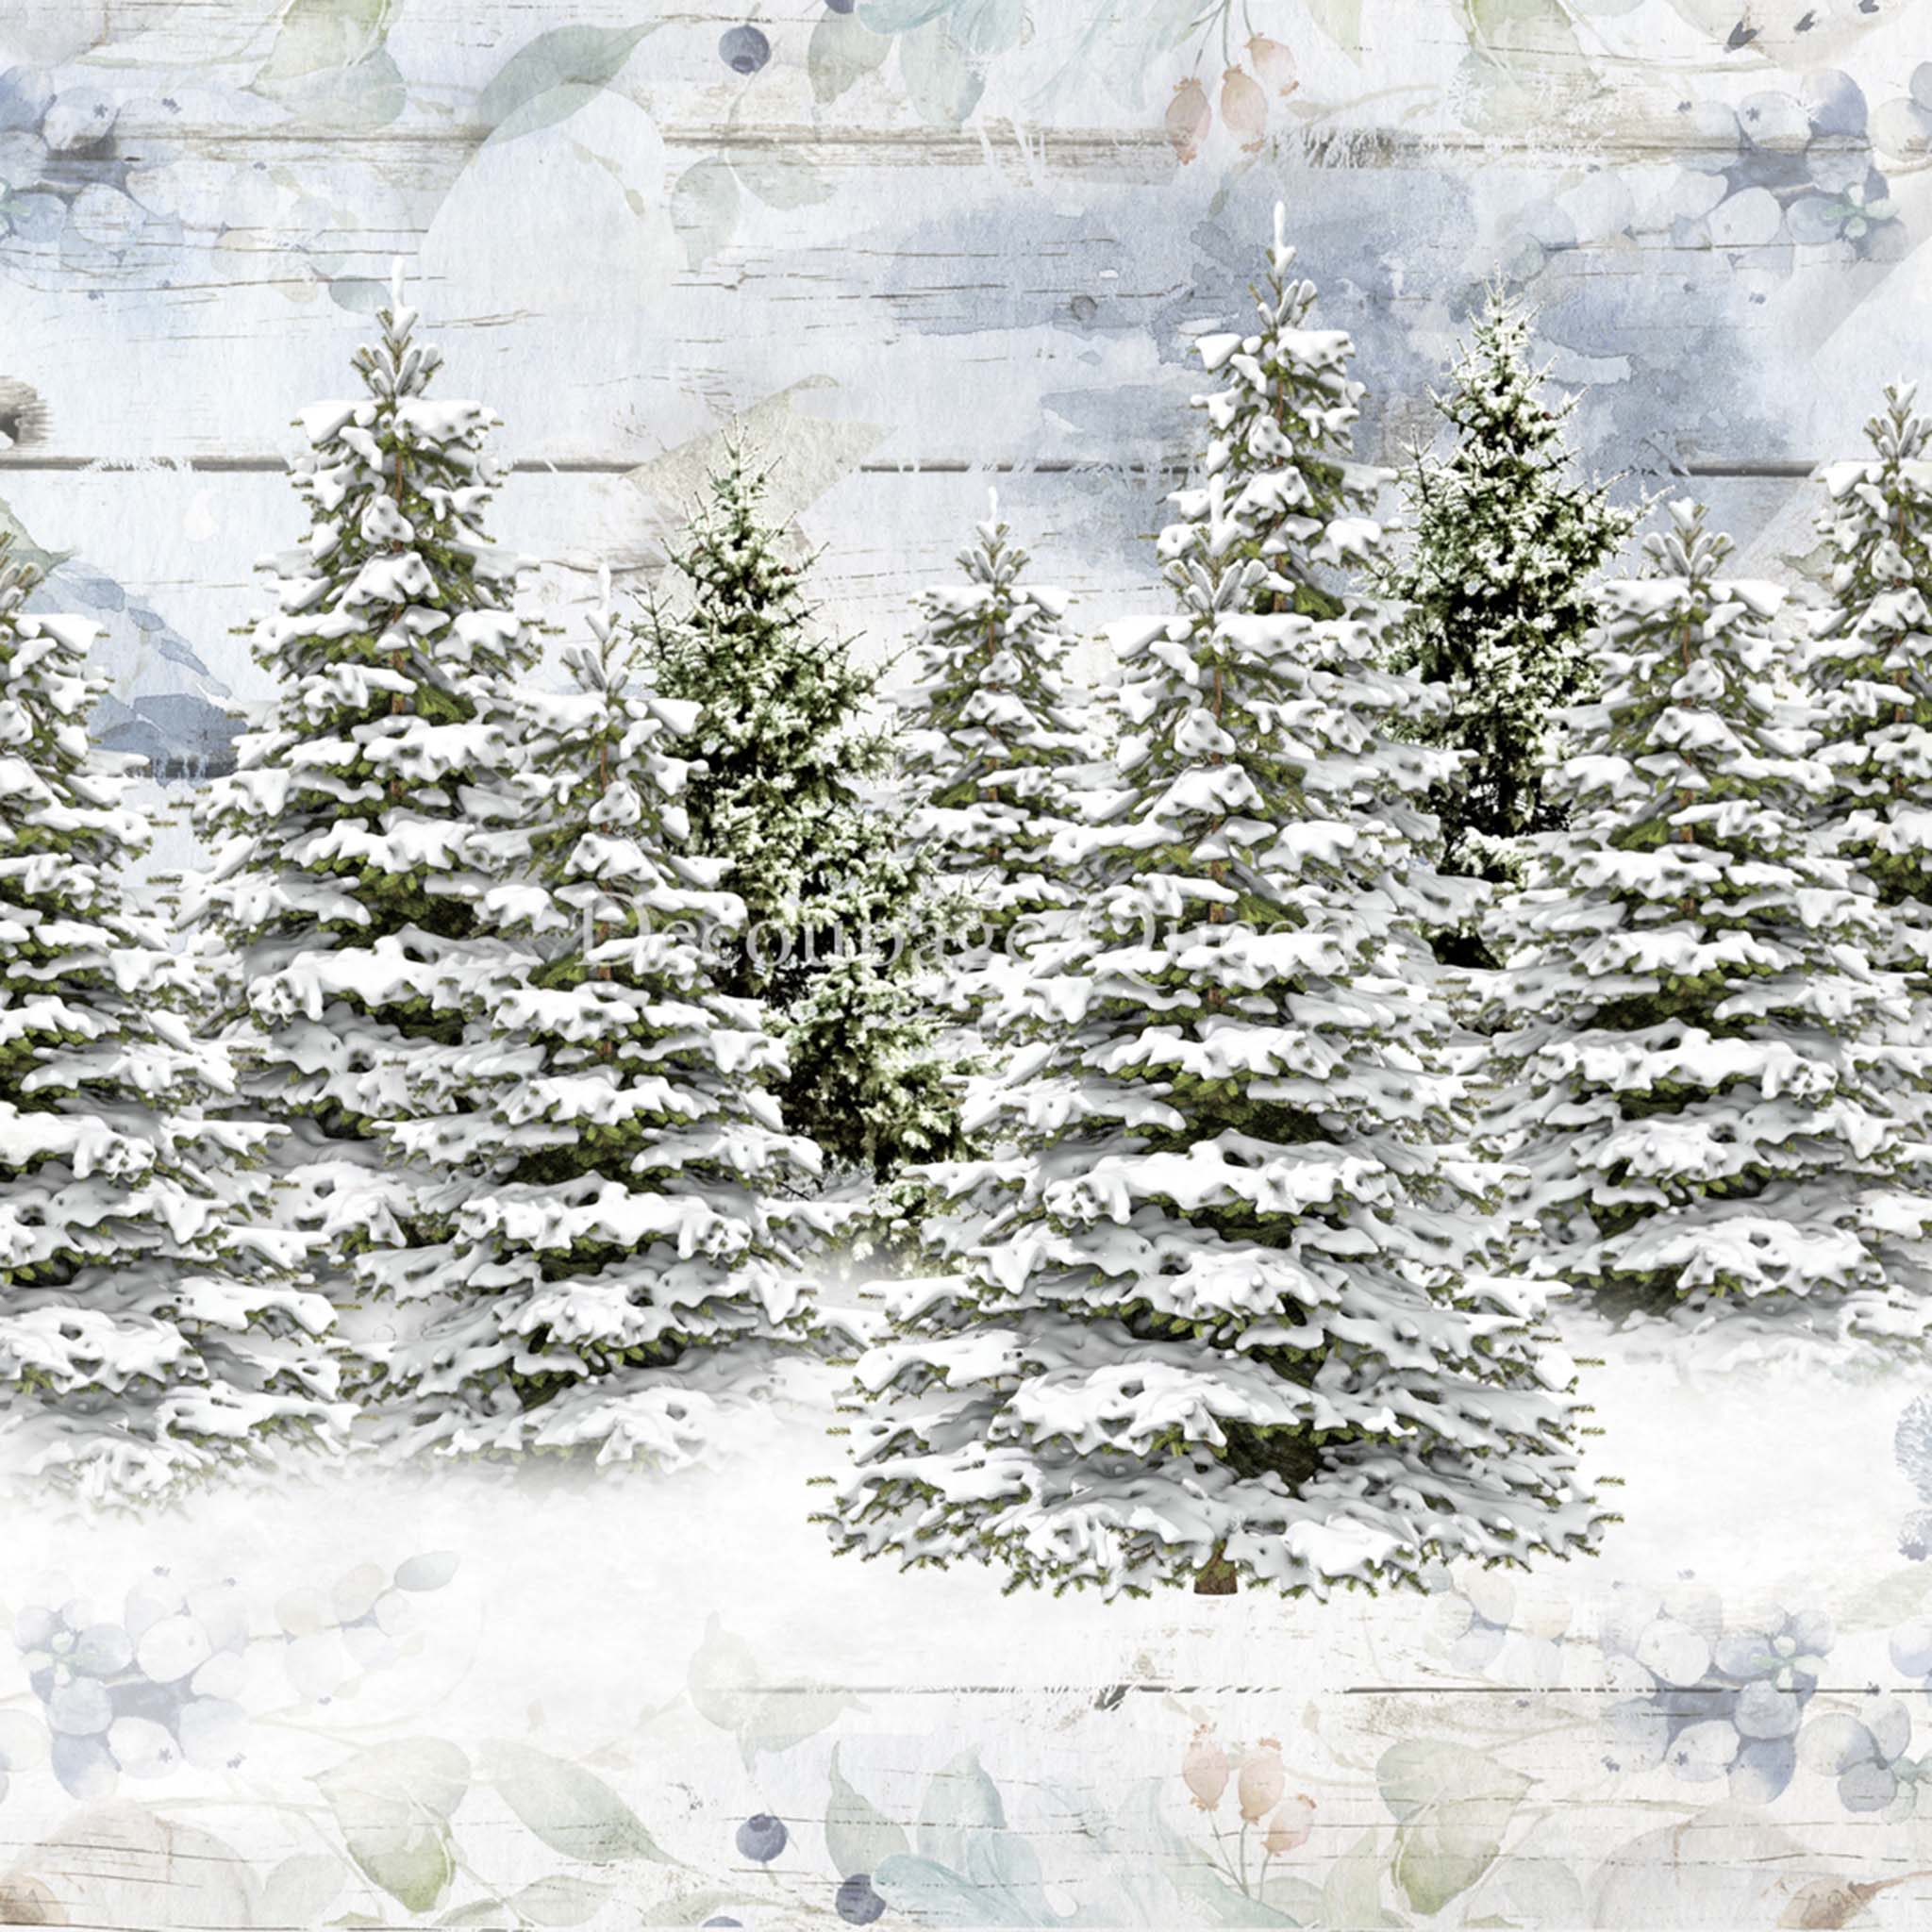 A3 rice paper design featuring a snowy scene full of pine trees.